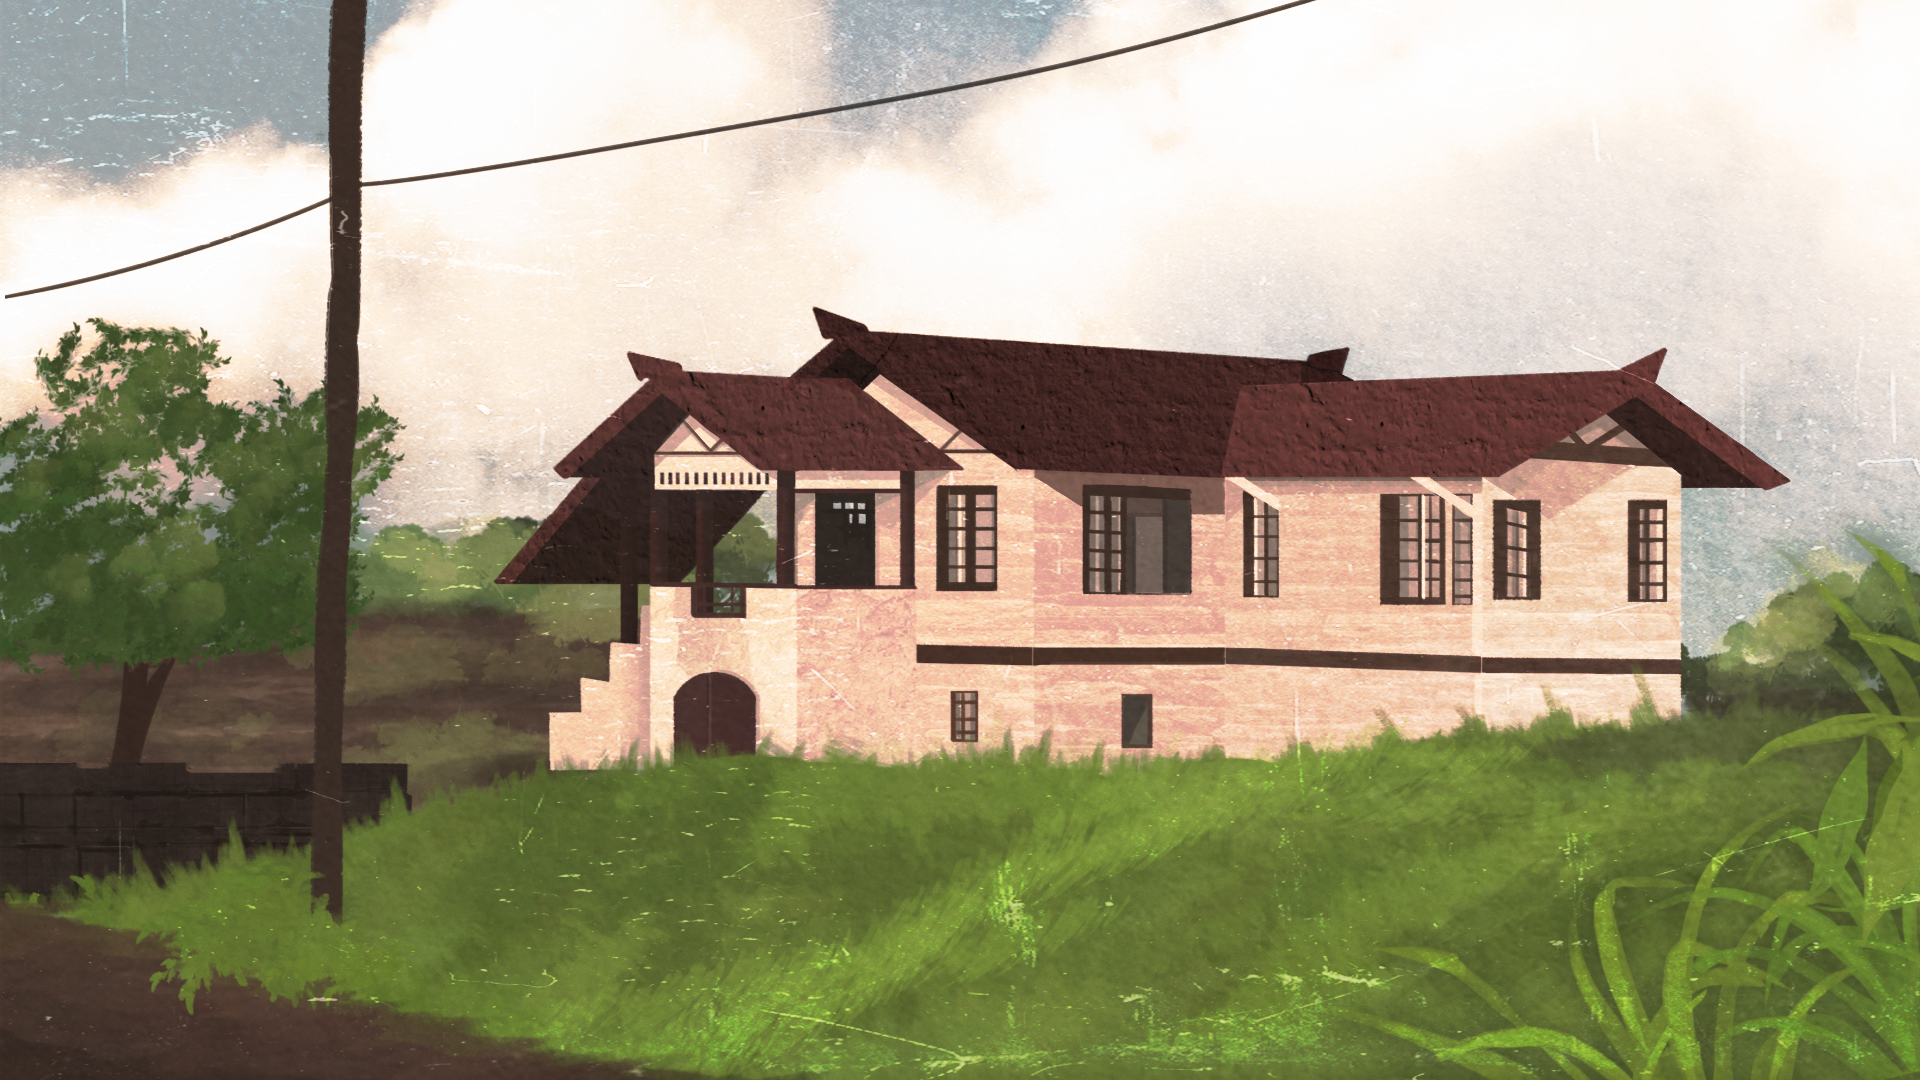 Once upon a time, Philippines ancestral houses stood with glory